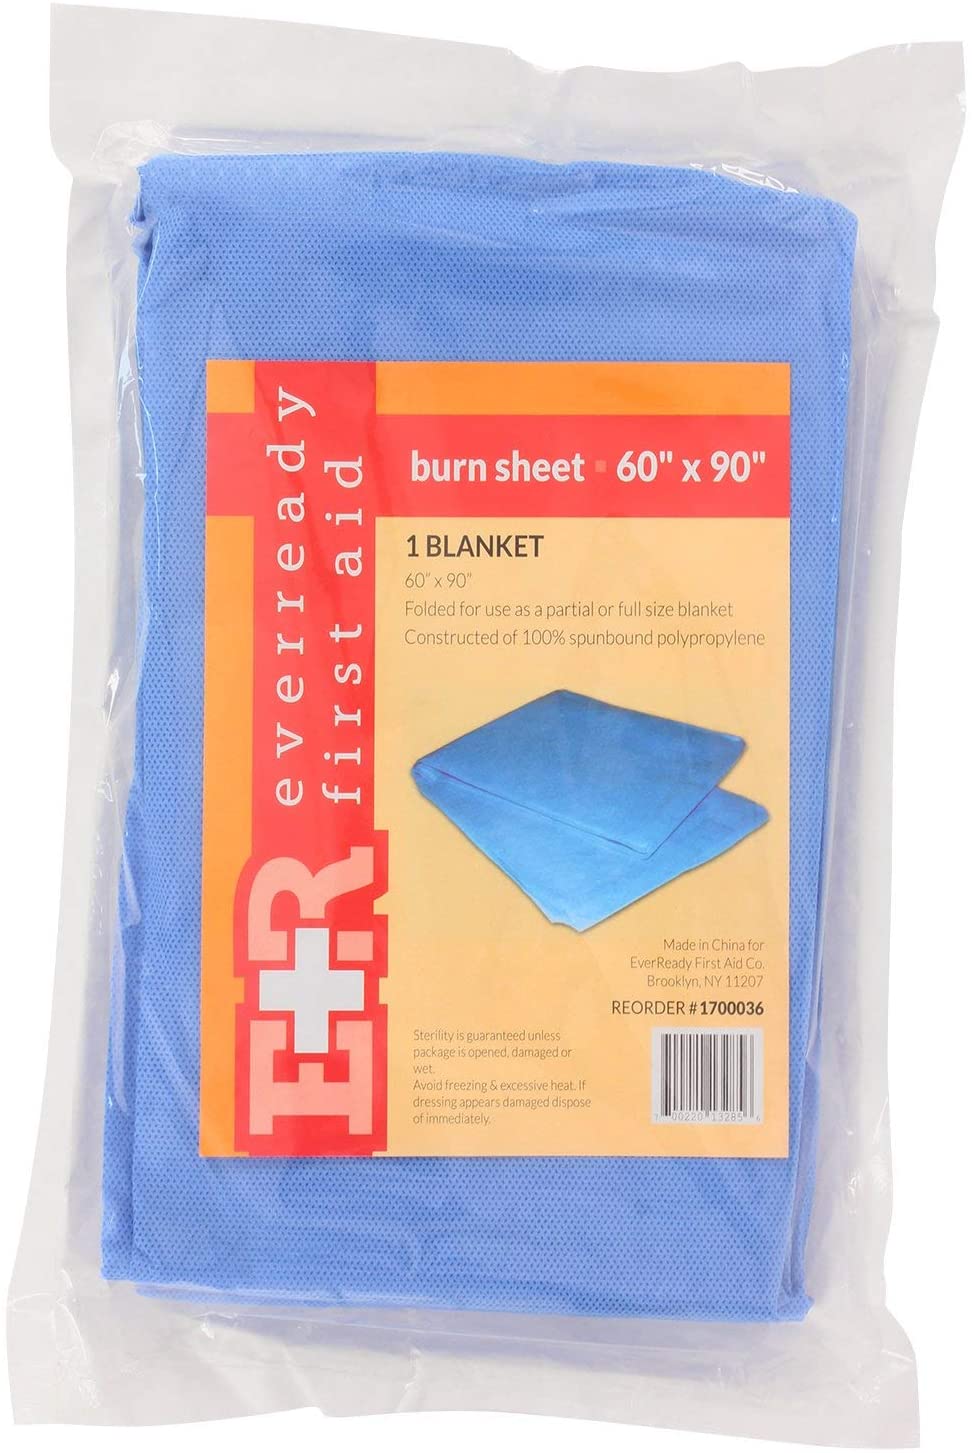 Ever Ready First Aid Sterile Burn Sheet Blanket - 60" x 90"